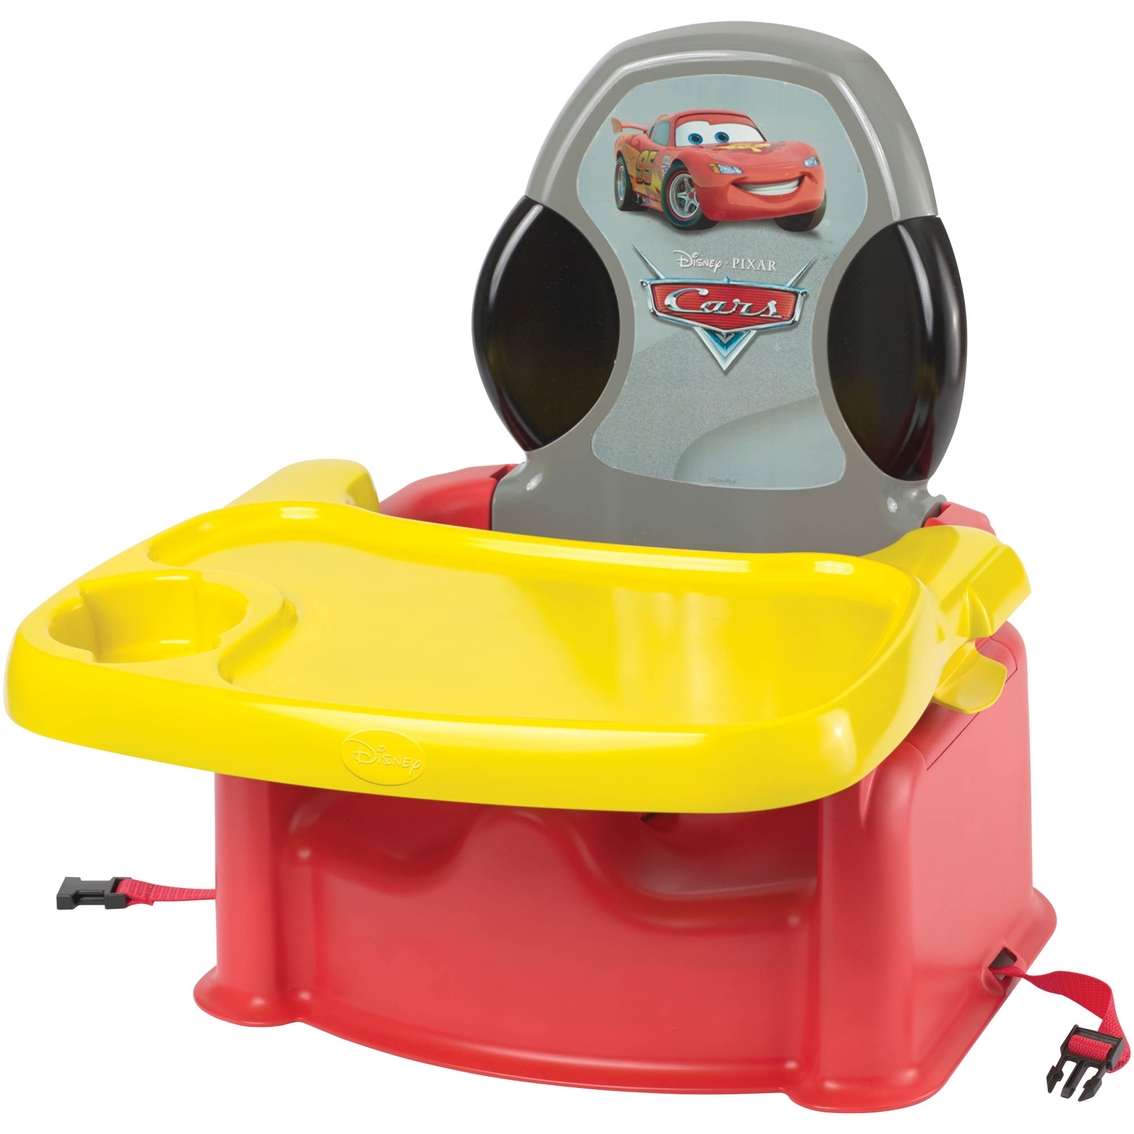 The First Years Disney Pixar Cars Booster Seat Booster Seats